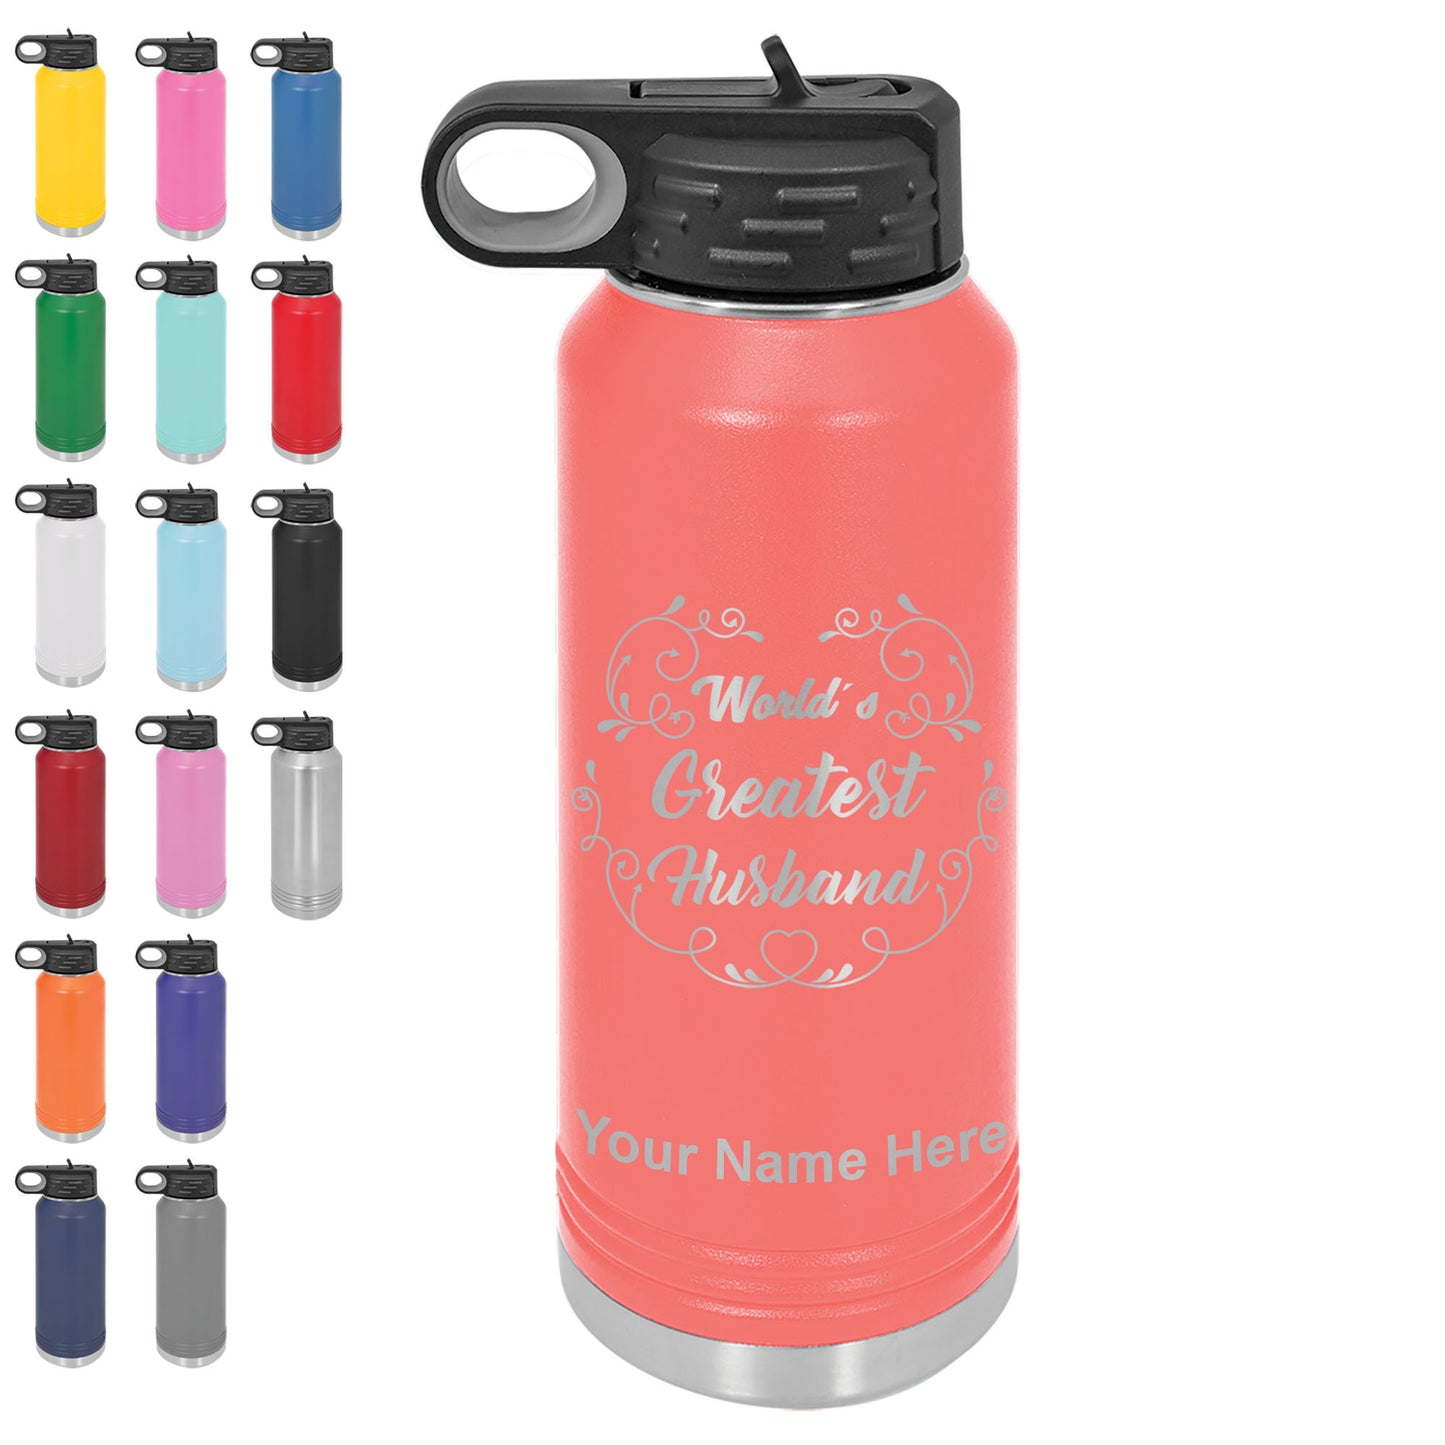 LaserGram 32oz Double Wall Flip Top Water Bottle with Straw, World's Greatest Husband, Personalized Engraving Included